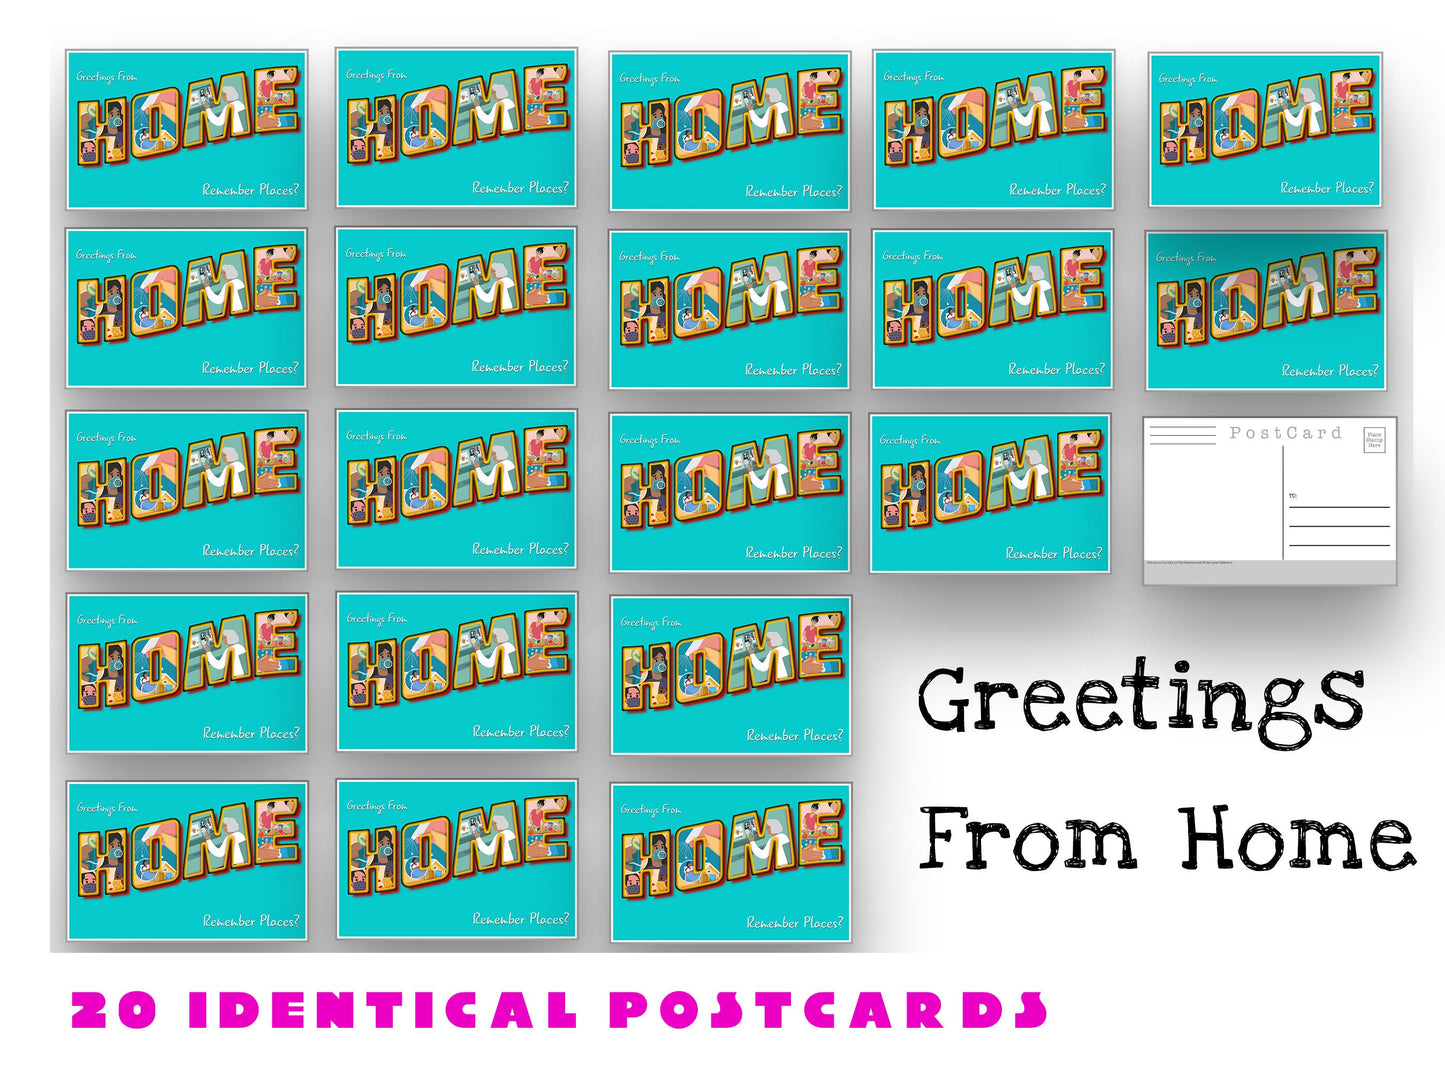 Greetings From Home Postcard Pack- Set of 20 Identical Corona Virus Postcards - Created from the CDC's Covid-19 posters